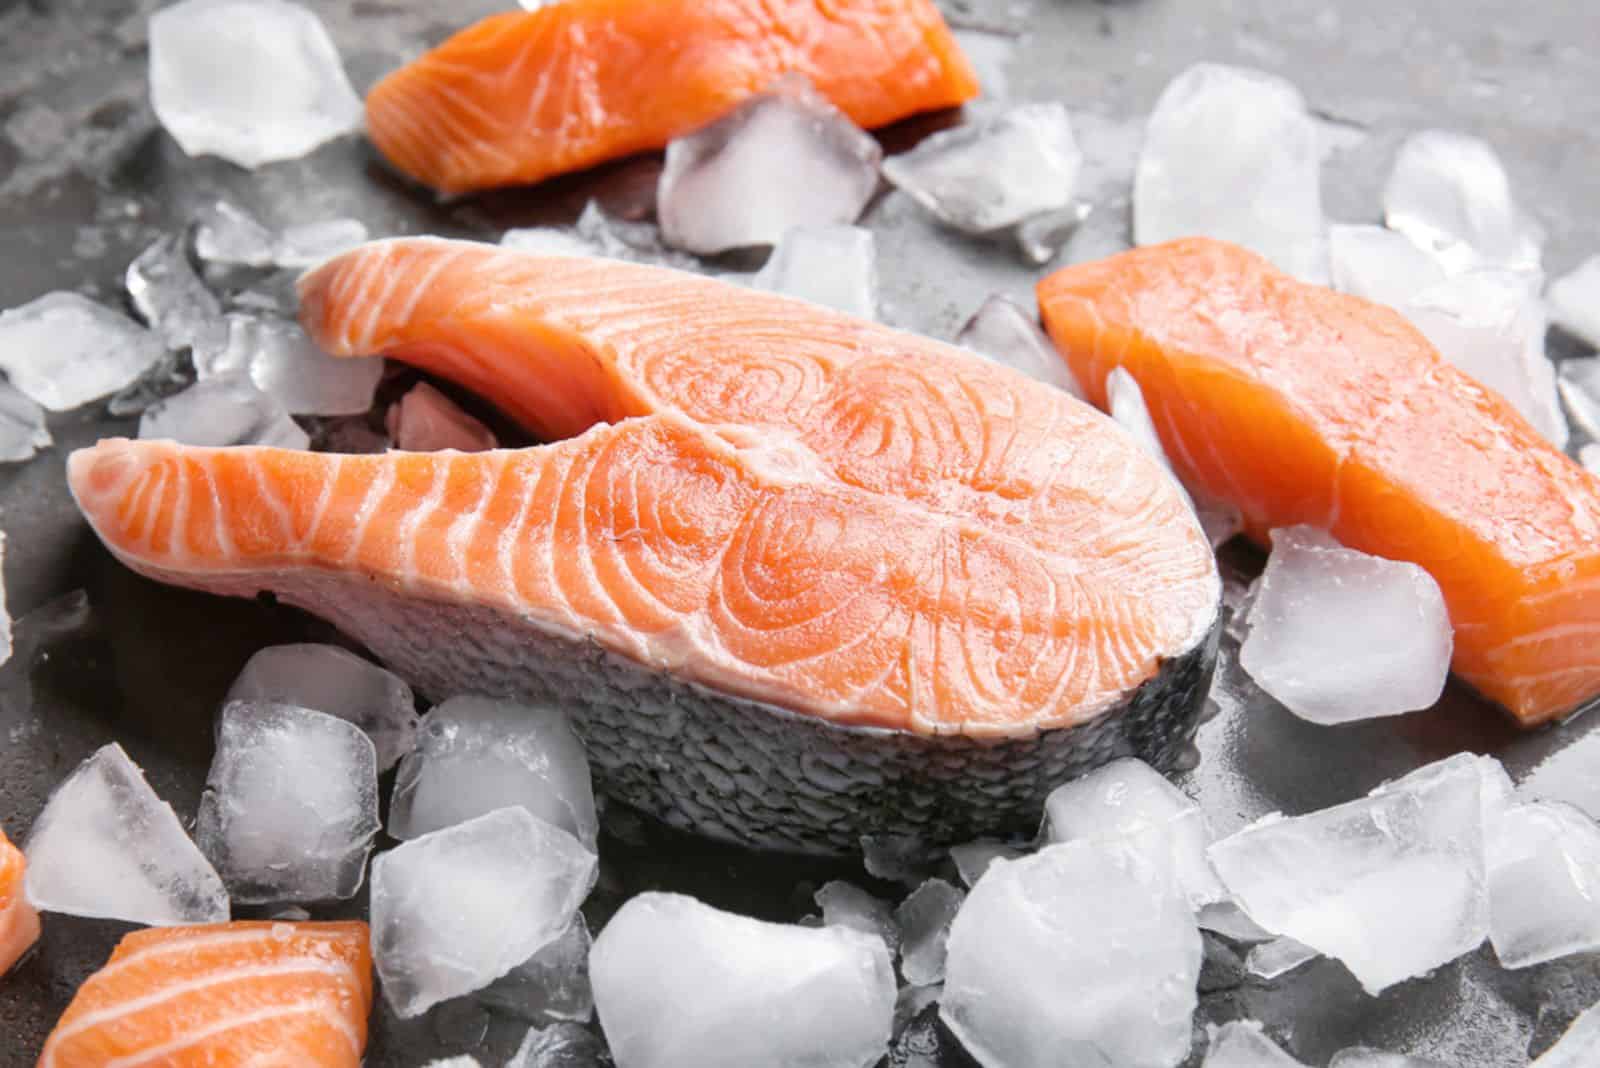 Raw salmon and ice cubes